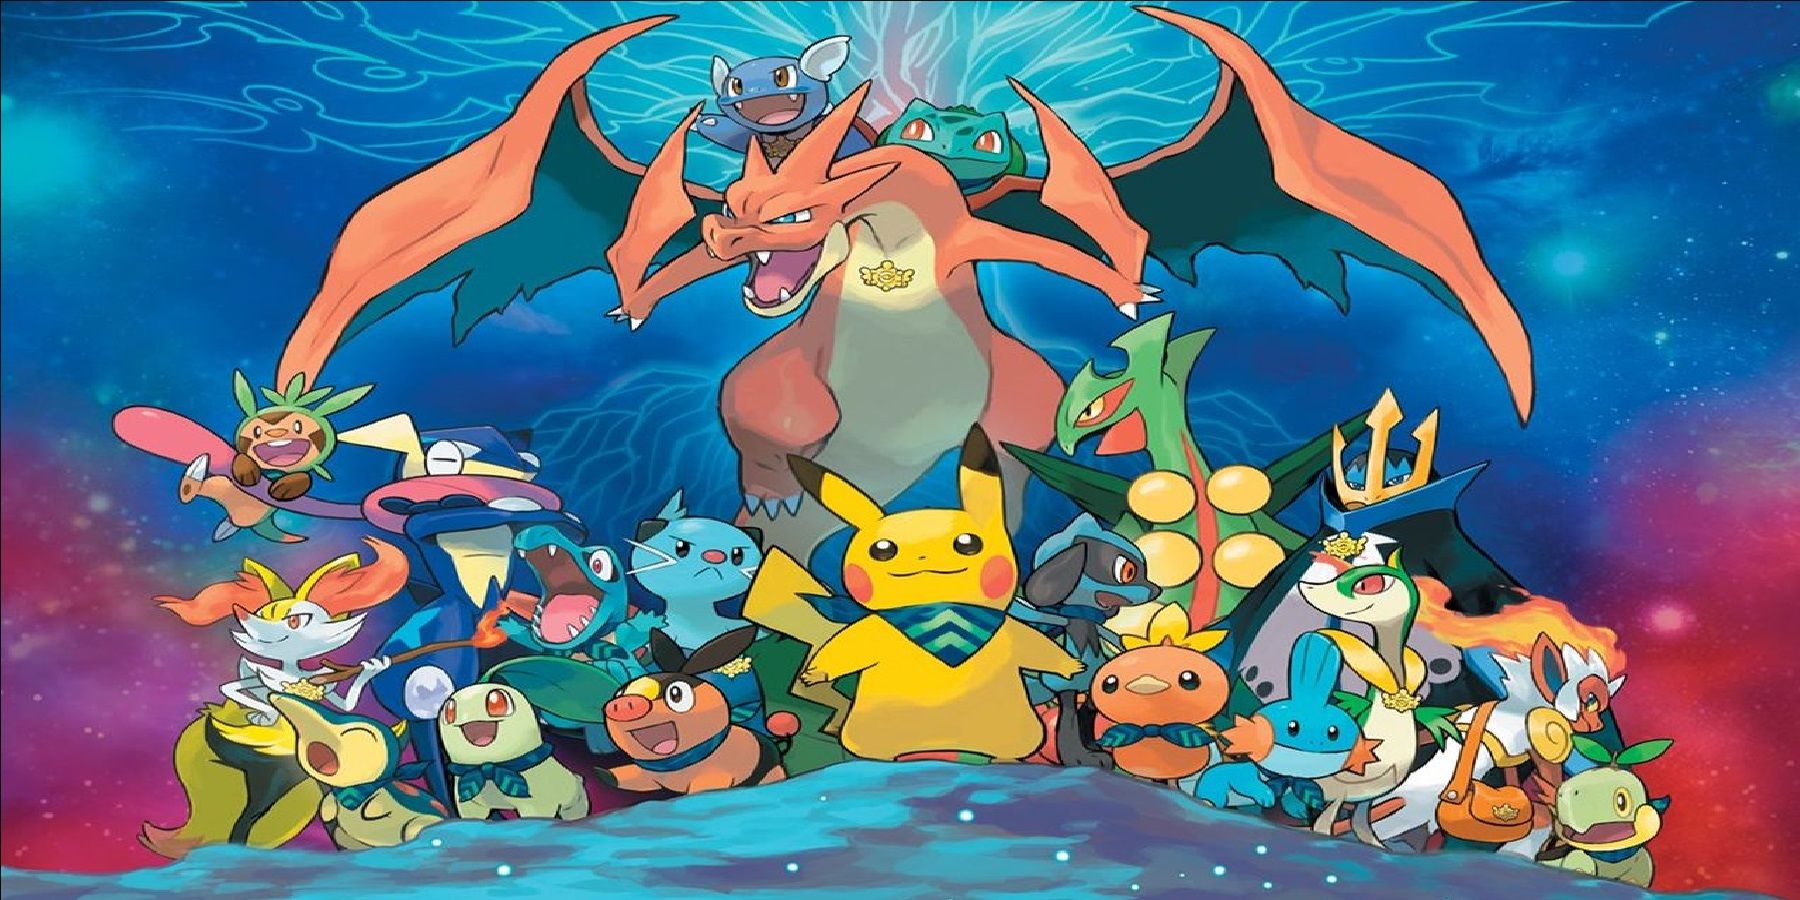 Pokemon fans share their controversial views on the franchise